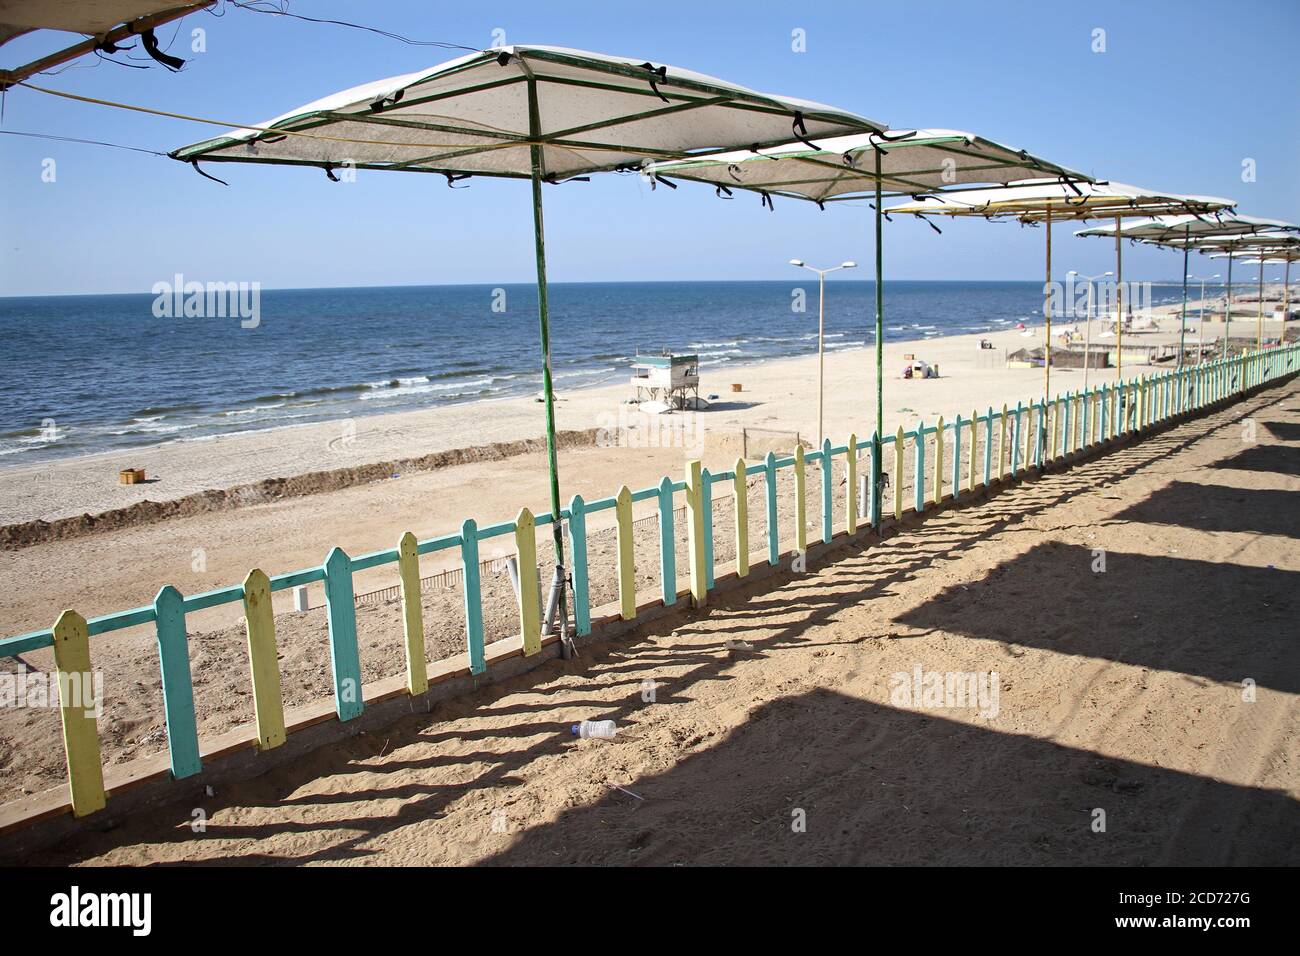 Gaza. 26th Aug, 2020. Photo taken on Aug. 26, 2020 shows the empty seaside in Gaza City. The Hamas-run ministry of interior announced on Wednesday that it decided to extend the lockdown imposed on all Gaza Strip districts for an additional 72 hours to combat coronavirus. Credit: Rizek Abdeljawad/Xinhua/Alamy Live News Stock Photo